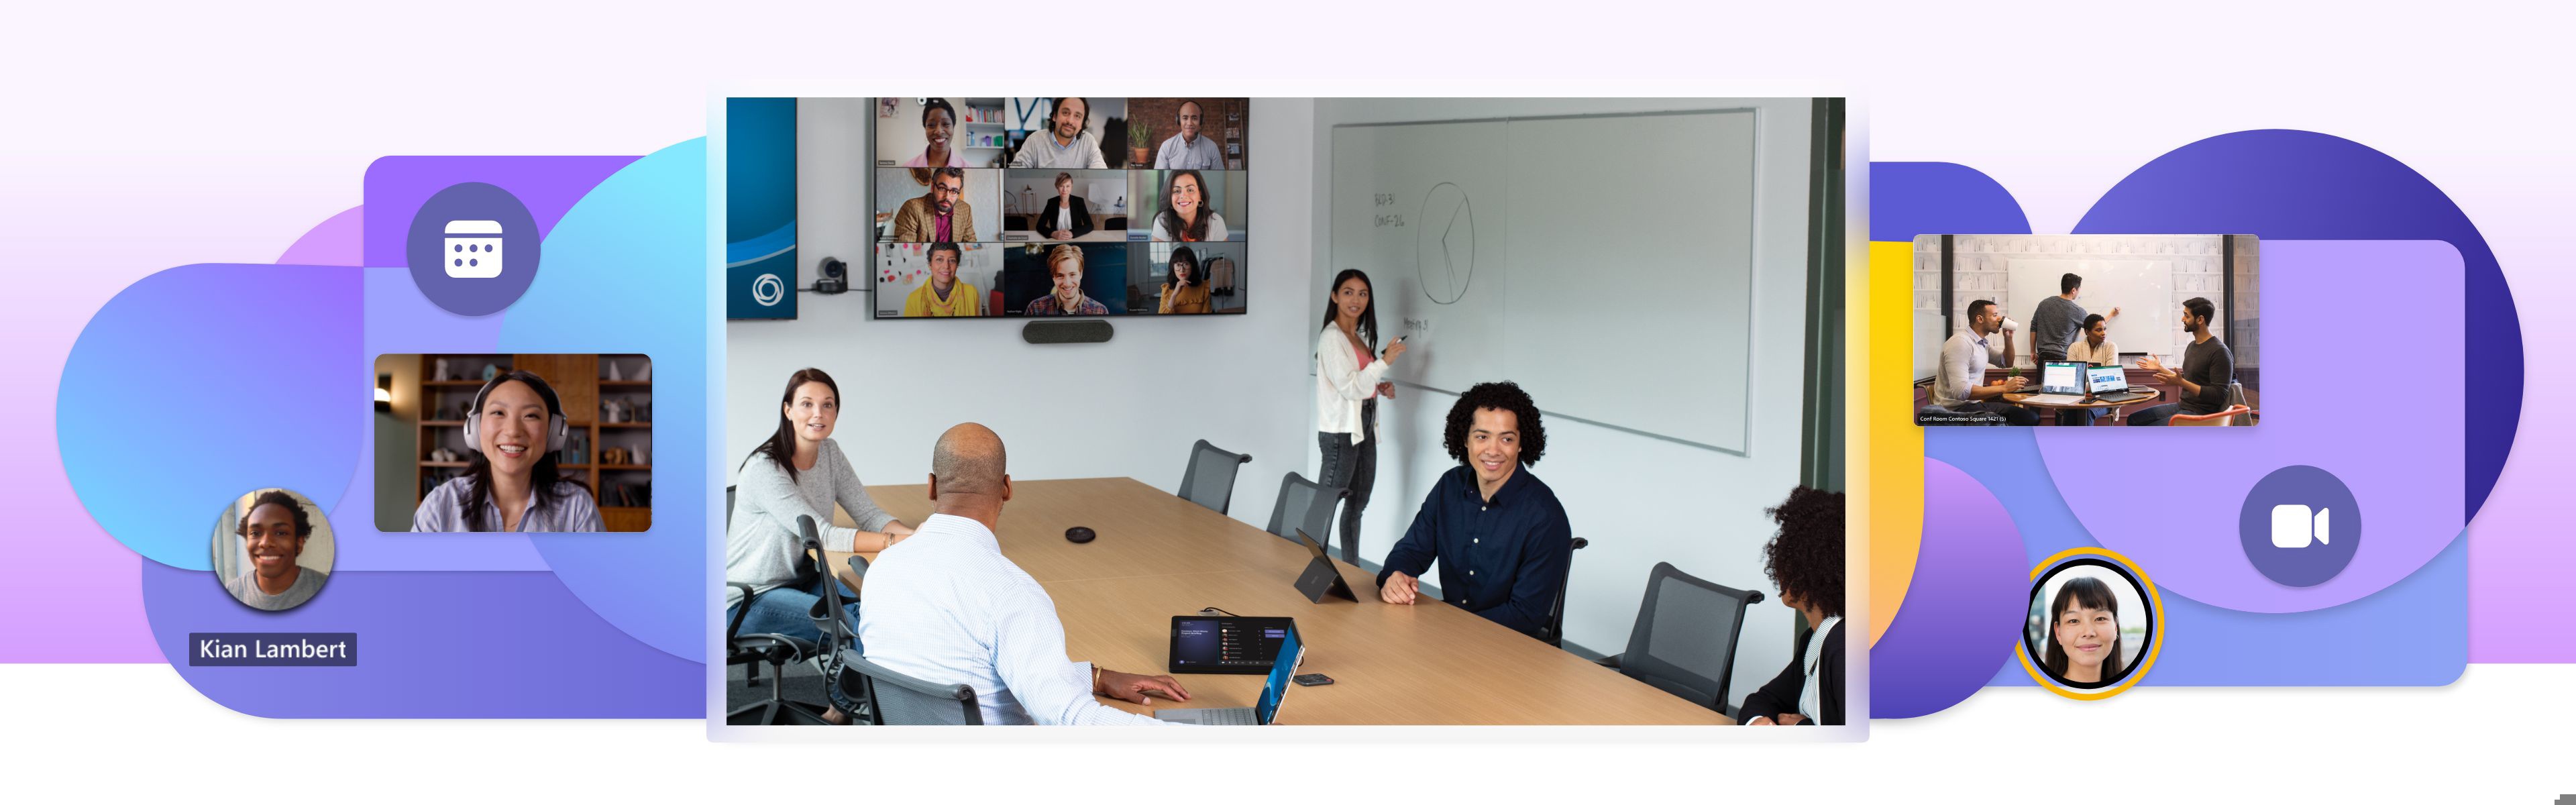 Five people in a Teams Room with a dual display screen on the wall at the front of the room. Four people are sitting at a conference table which has a front-of-the-room console on it. One person is writing at a whiteboard on the side wall.